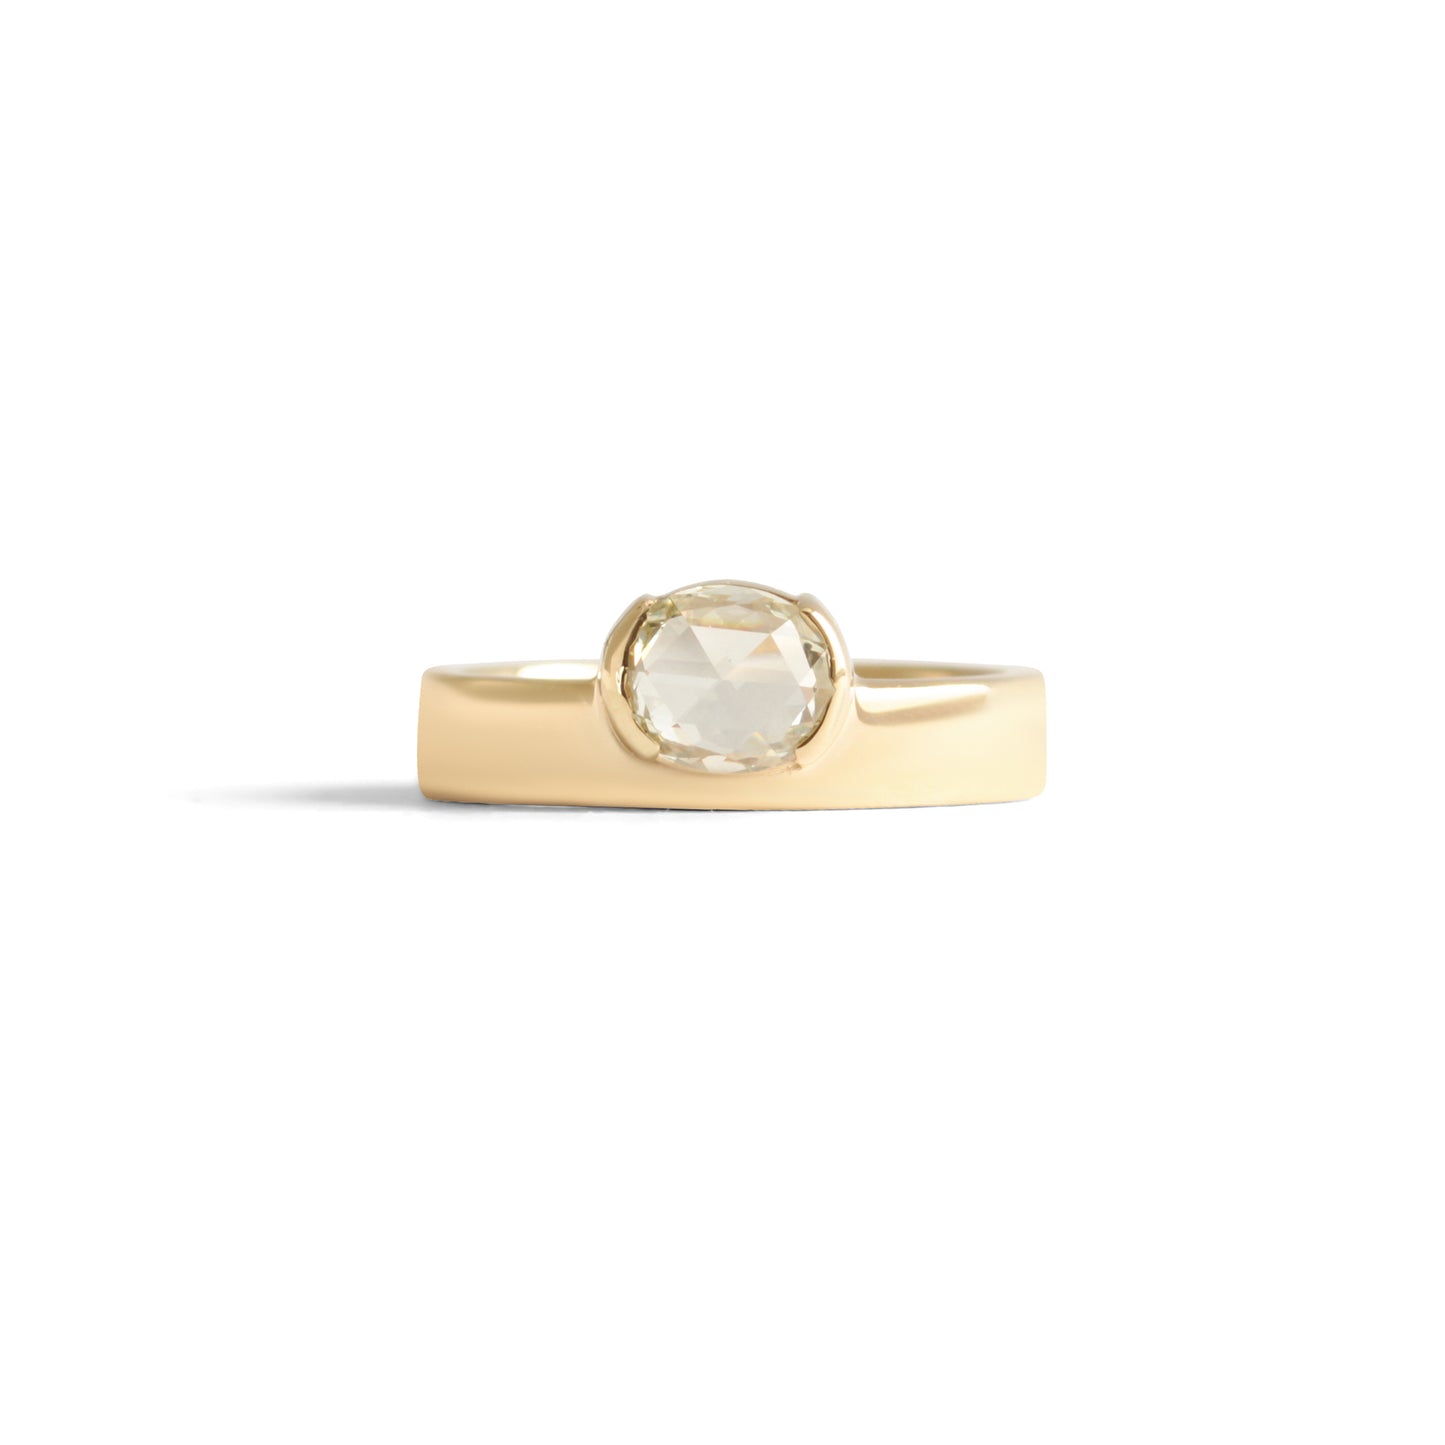 Load image into Gallery viewer, Horizon Band / Natural Rose Cut Oval Diamond - Goldpoint Studio - Greenpoint, Brooklyn - Fine Jewelry
